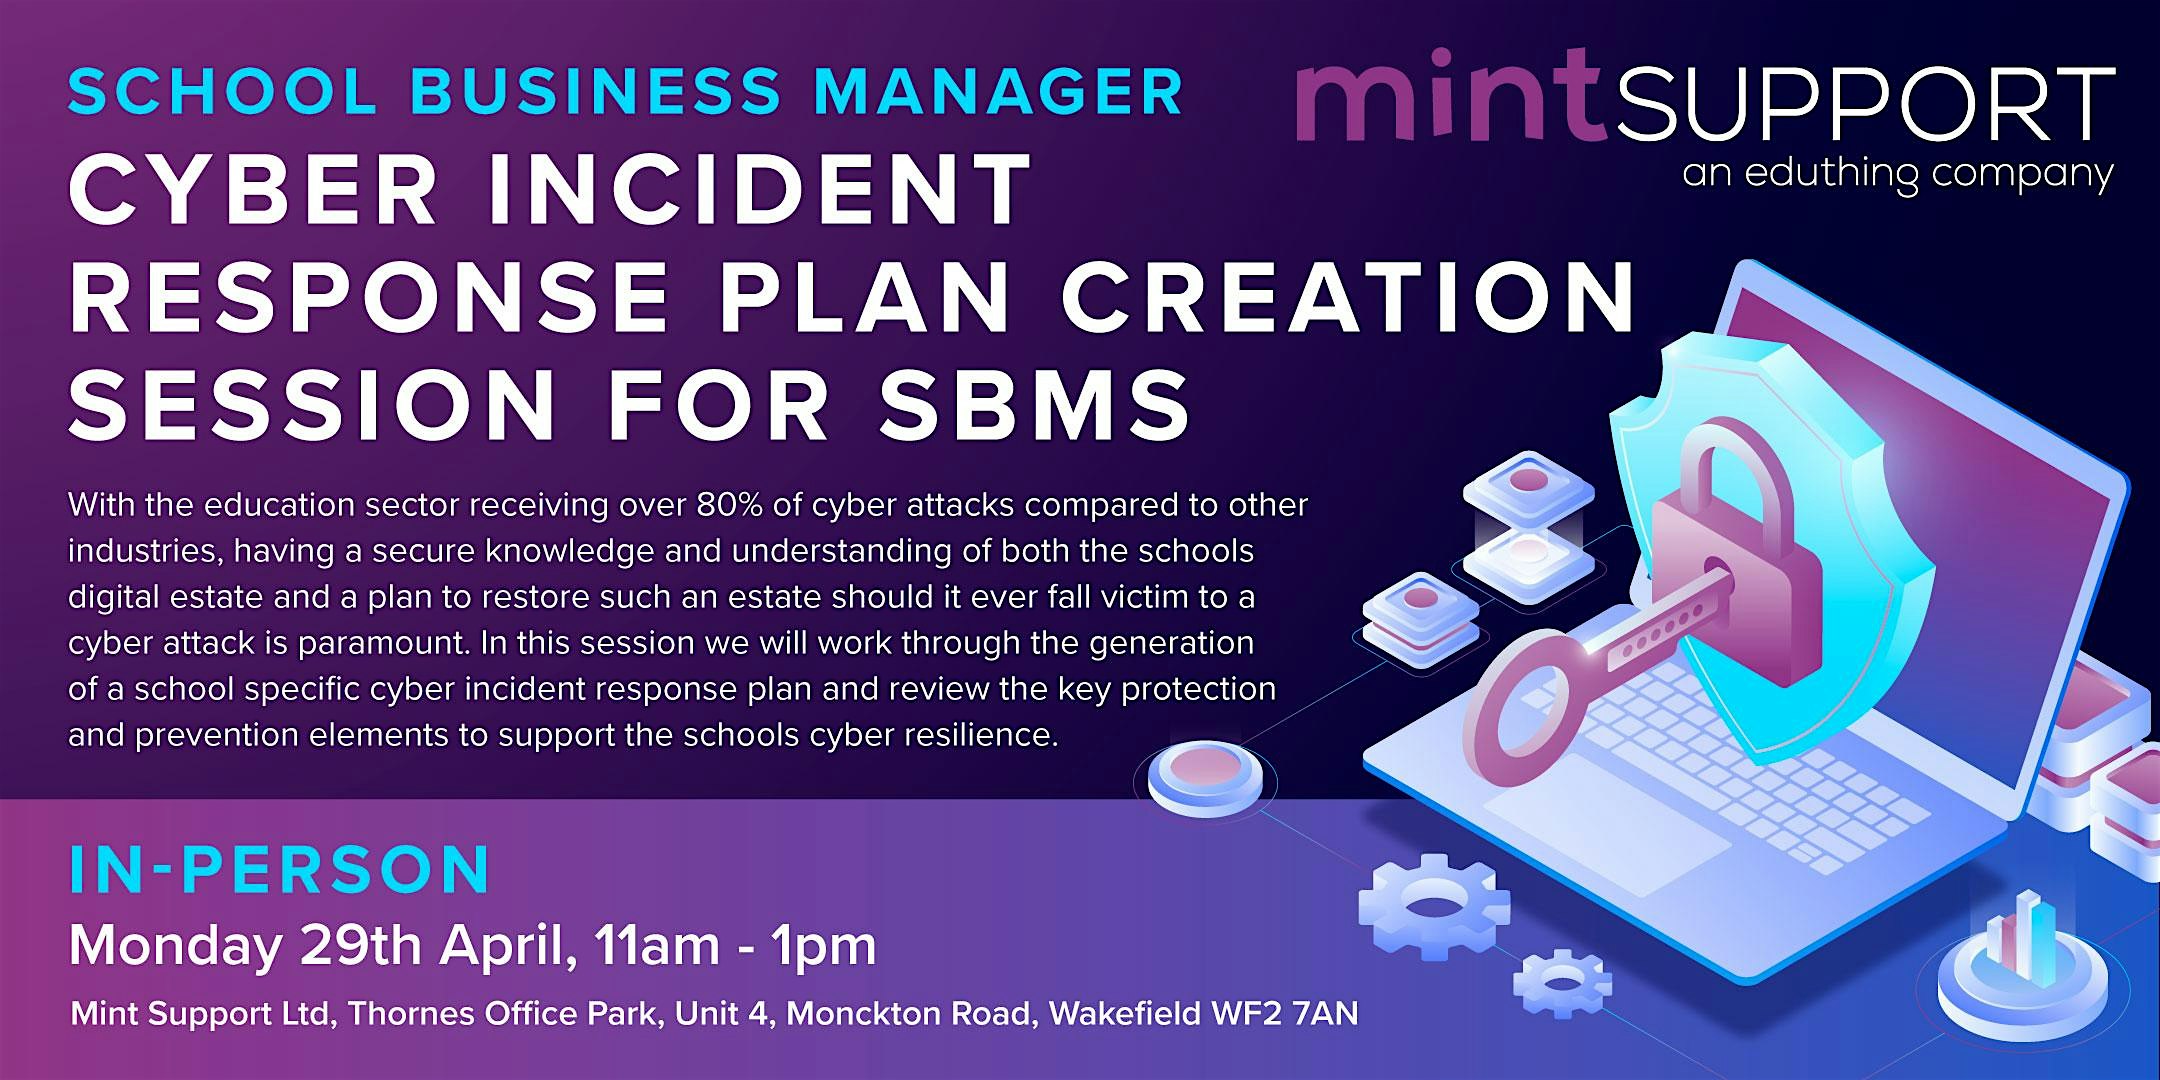 Cyber Incident Response Plan Creation Session for SBMs (Mint Support)